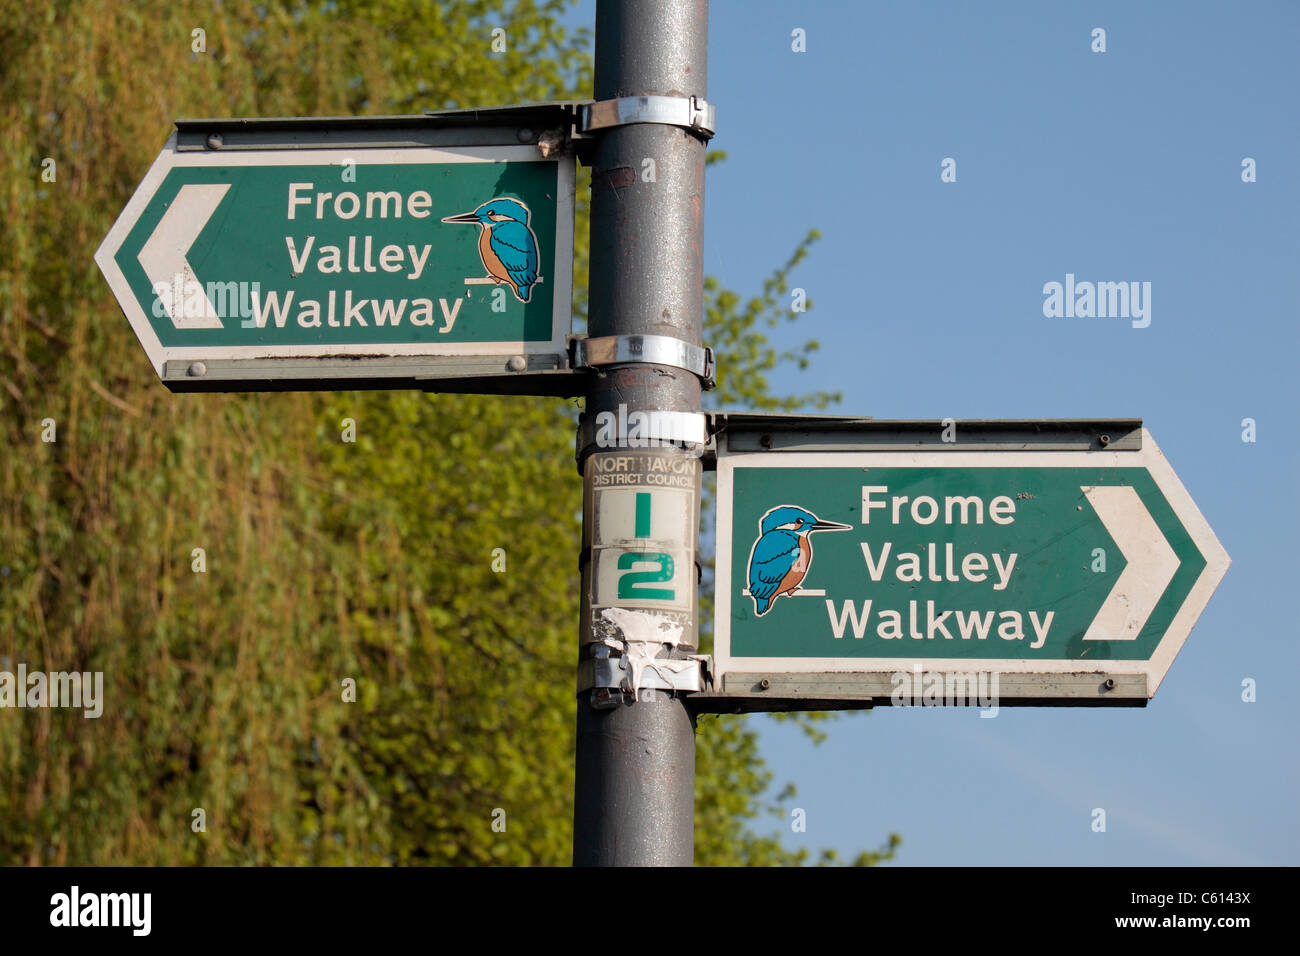 Road signs for the Frome Valley Walkway in Chipping Sodbury, South Gloucestershire, UK. Stock Photo